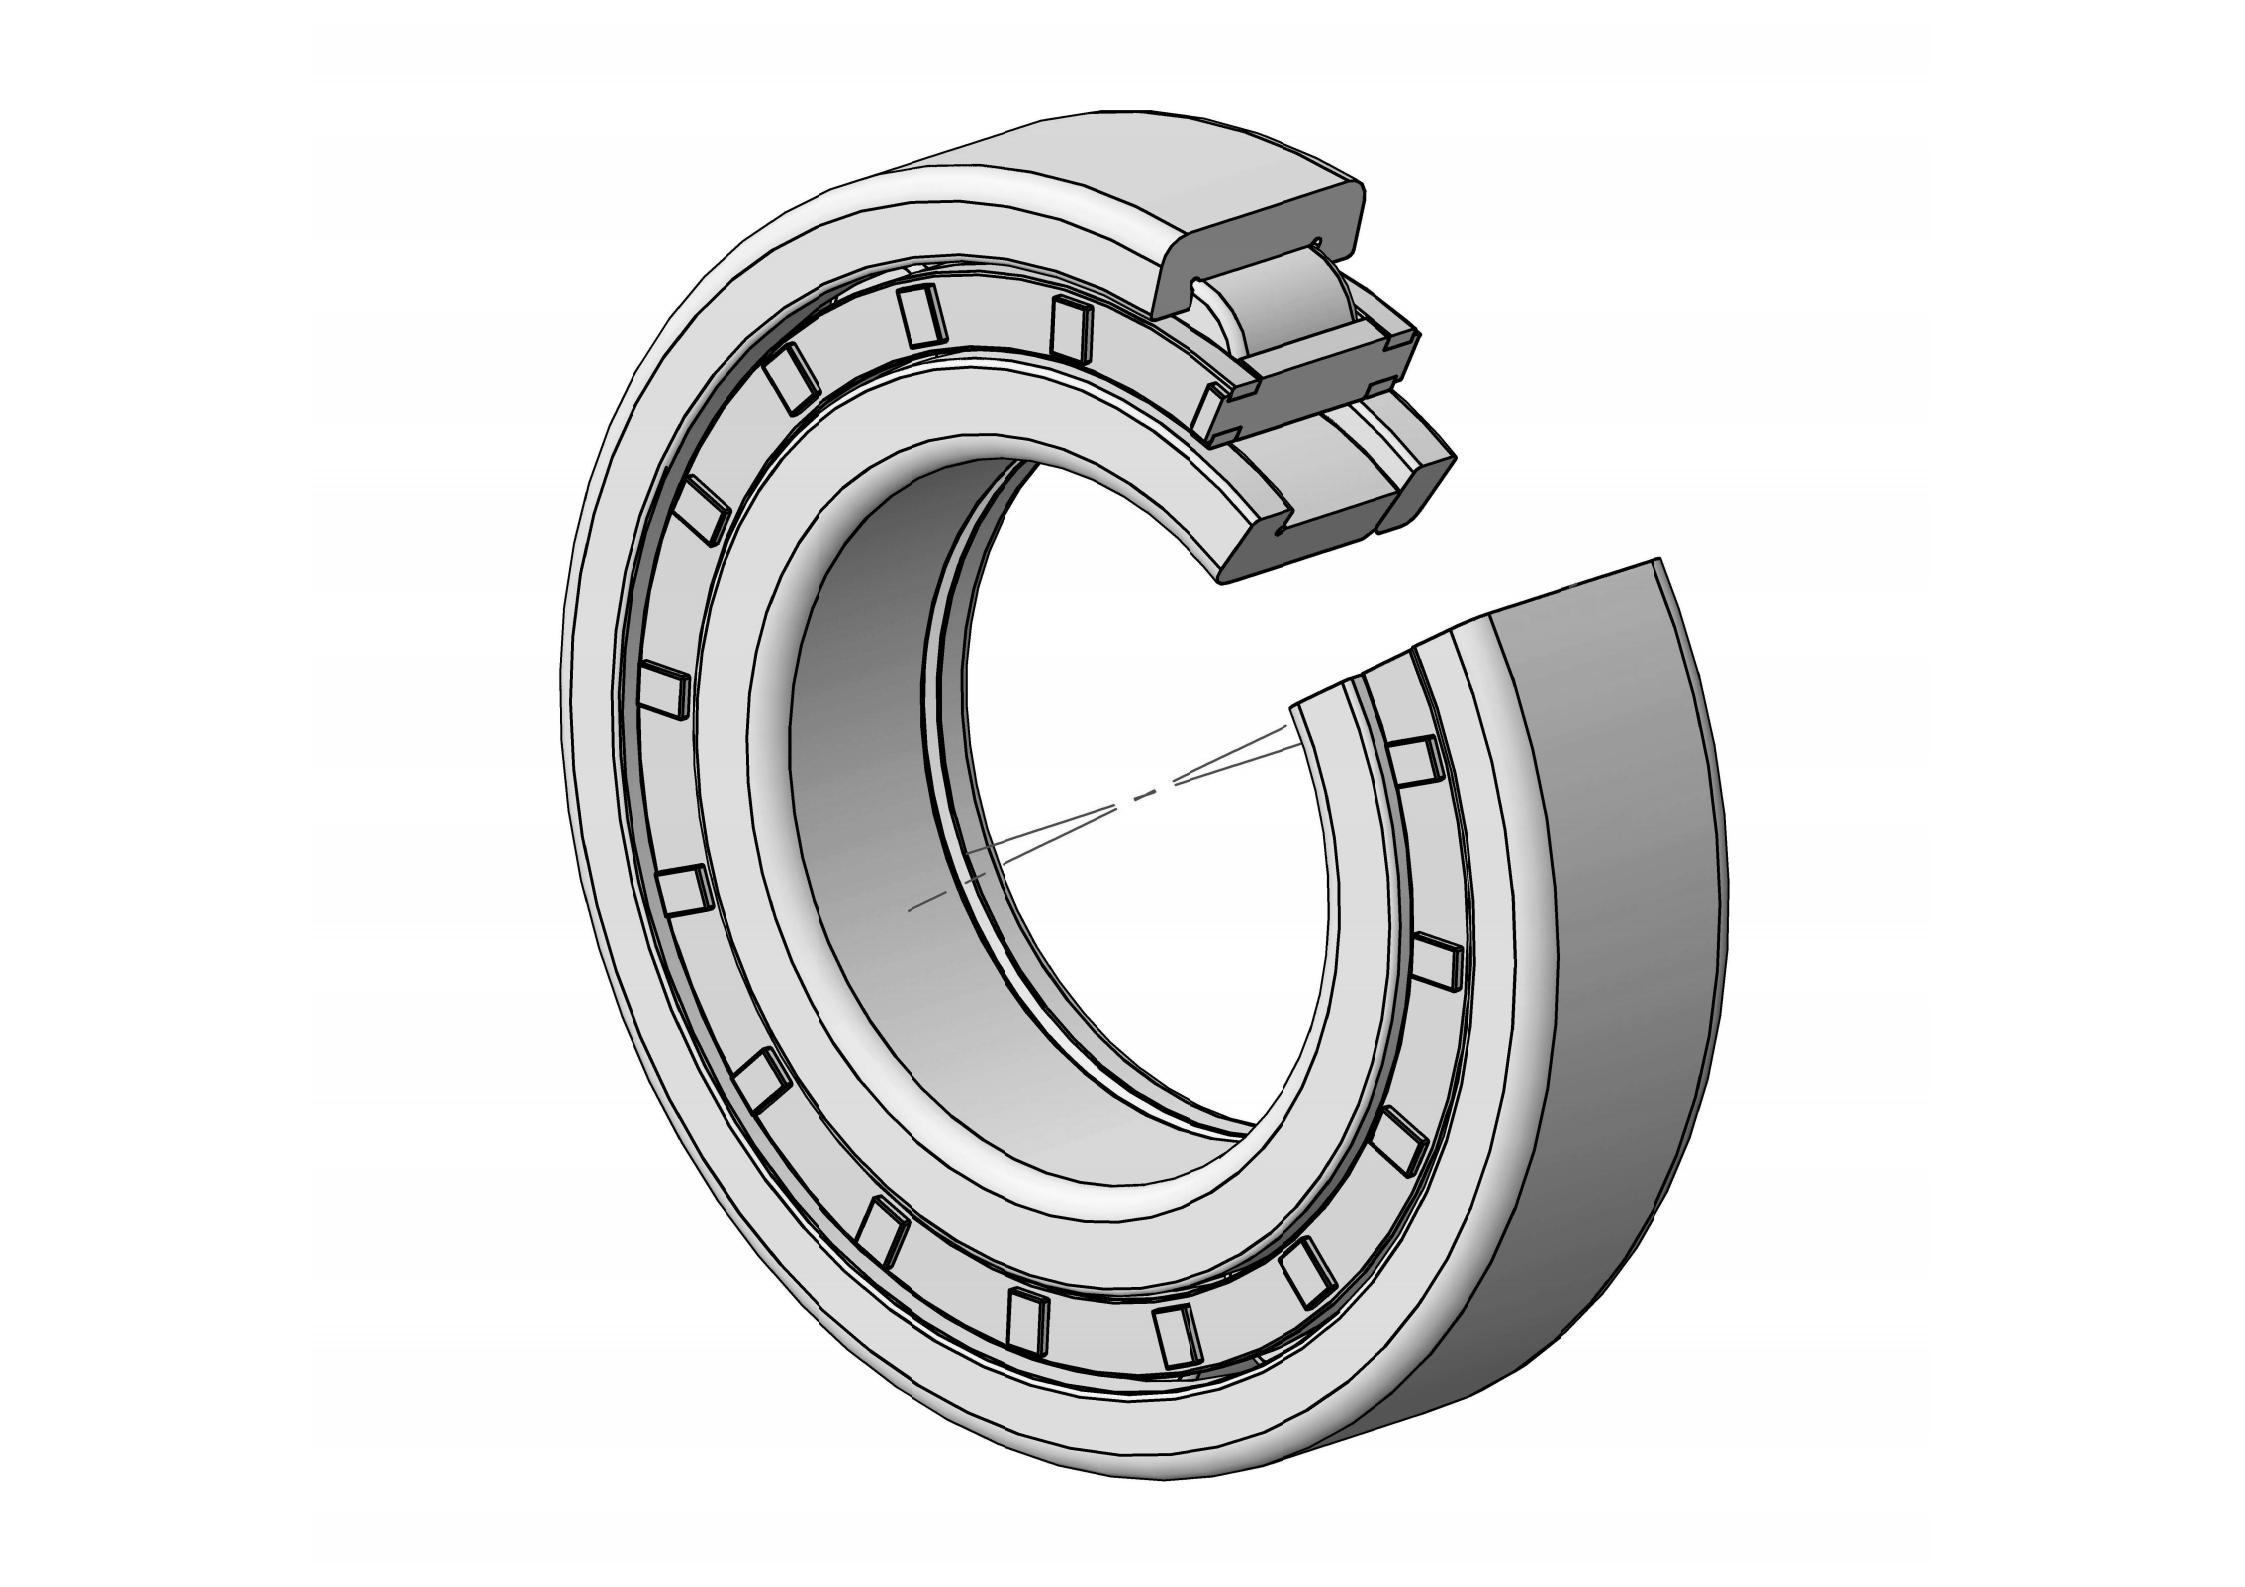 NUP209-E Single Row Cylindrical roller bearing 